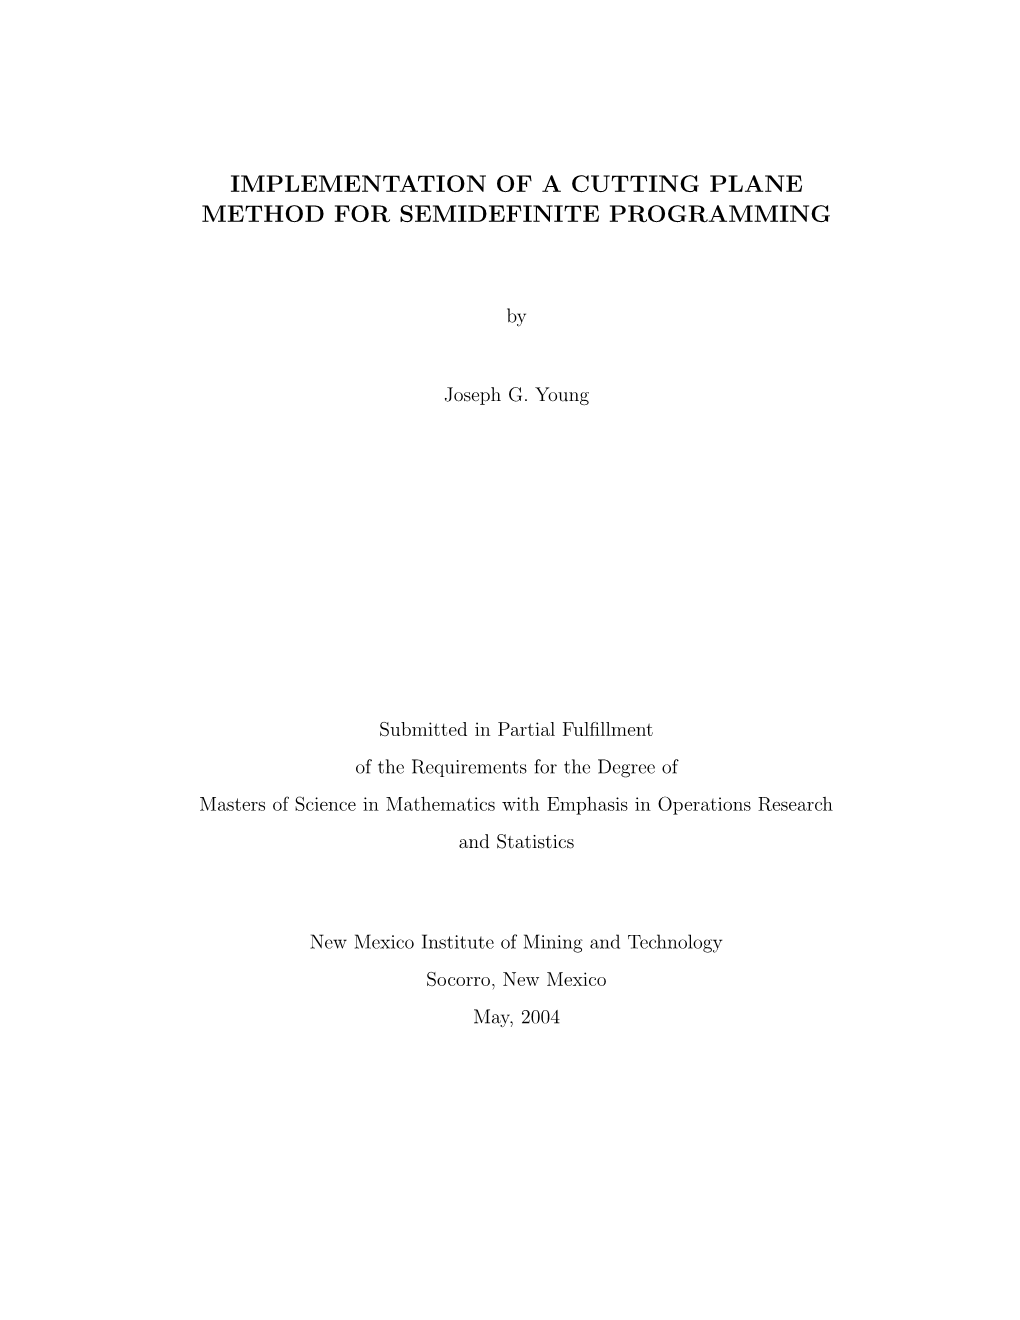 Implementation of a Cutting Plane Method for Semidefinite Programming